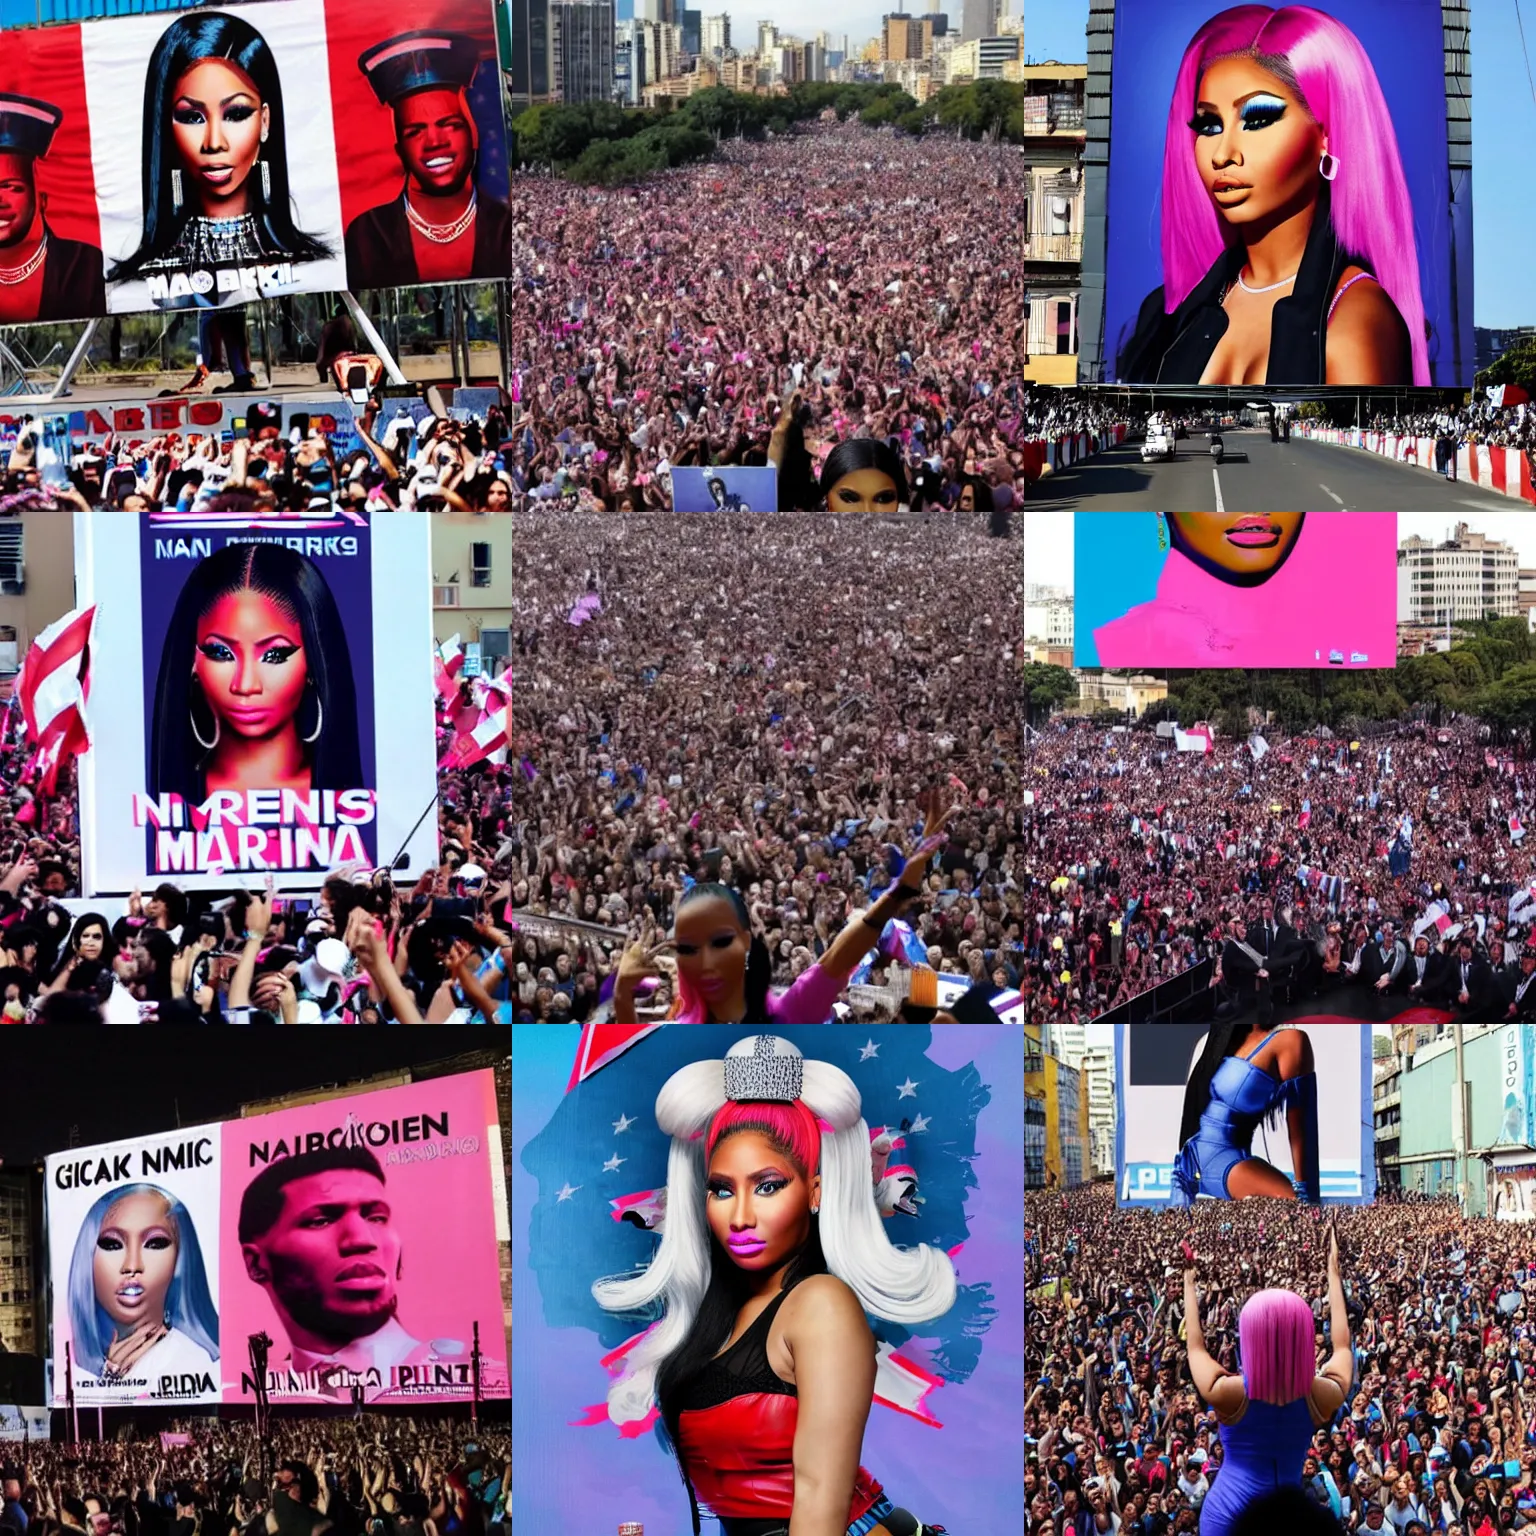 Prompt: Nicki Minaj giant poster presidential rally in Argentina in a Peronist style